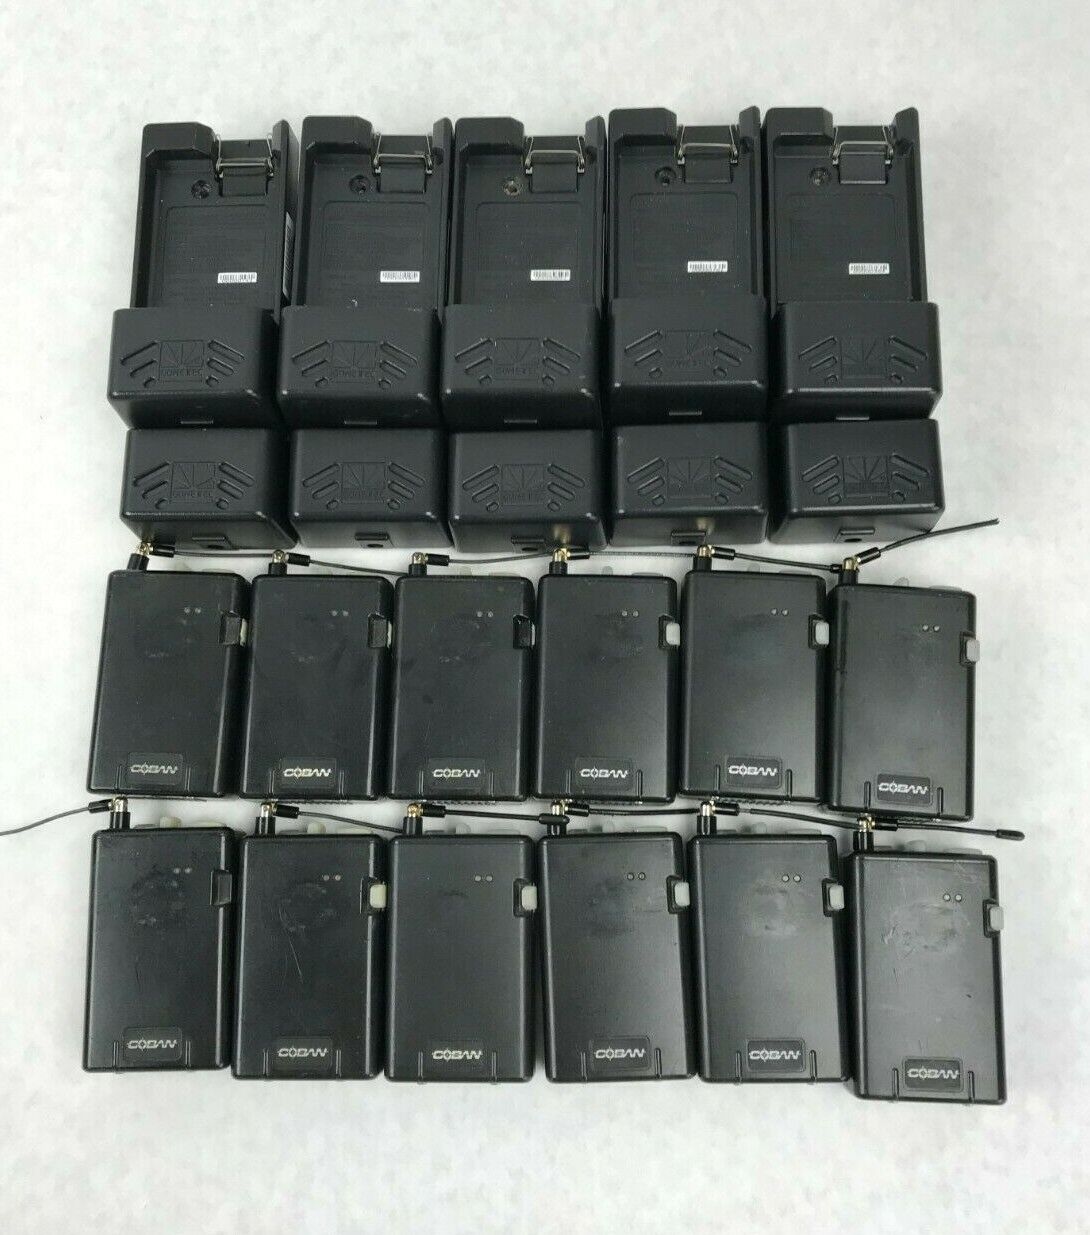 Lot of 12 Coban GWD910T Waterproof DSSS Wireless Microphone & GWDCHG01 Charger